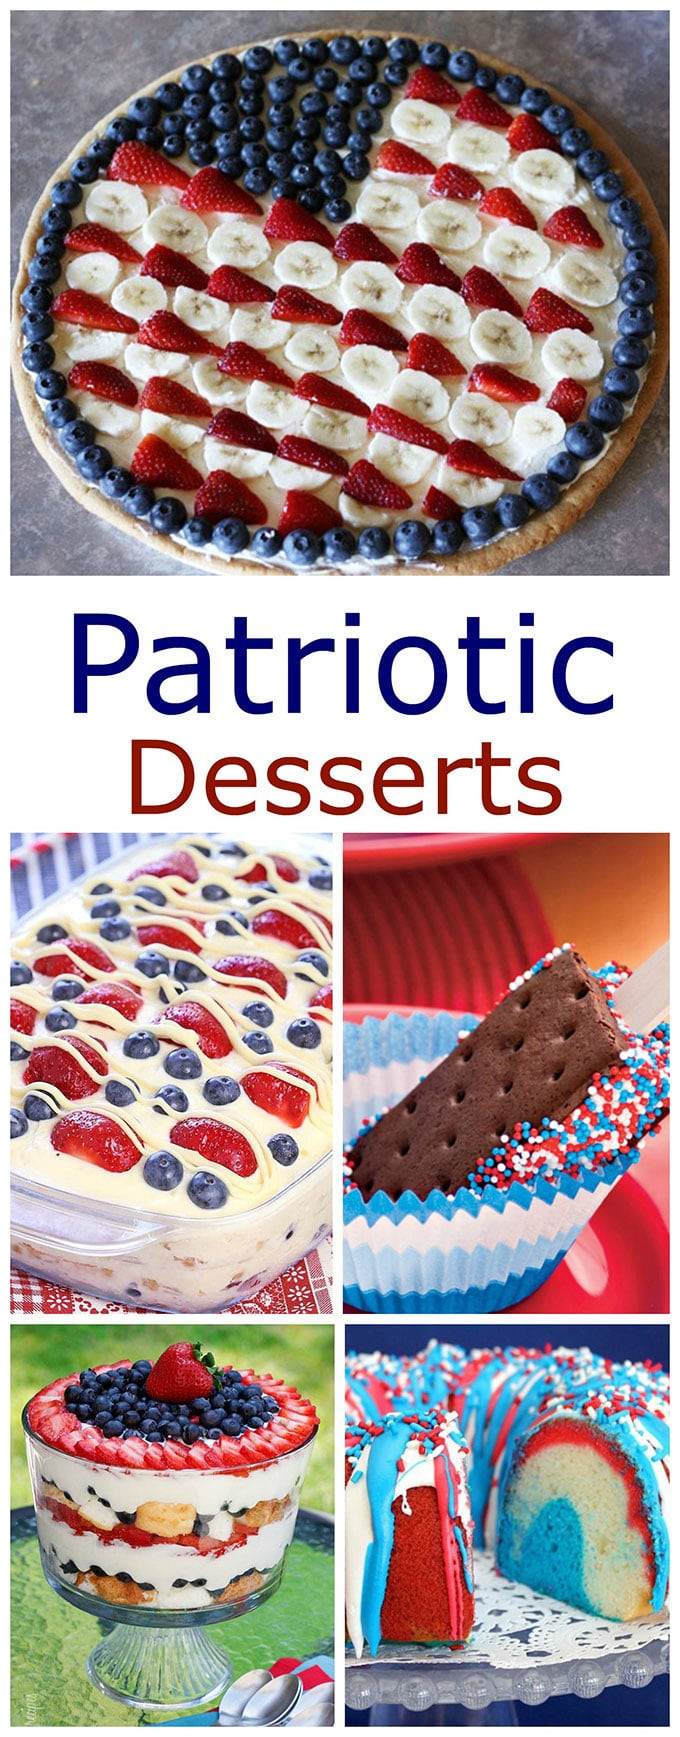 Easy July 4Th Desserts
 Quick And Easy 4th of July Desserts House of Hawthornes